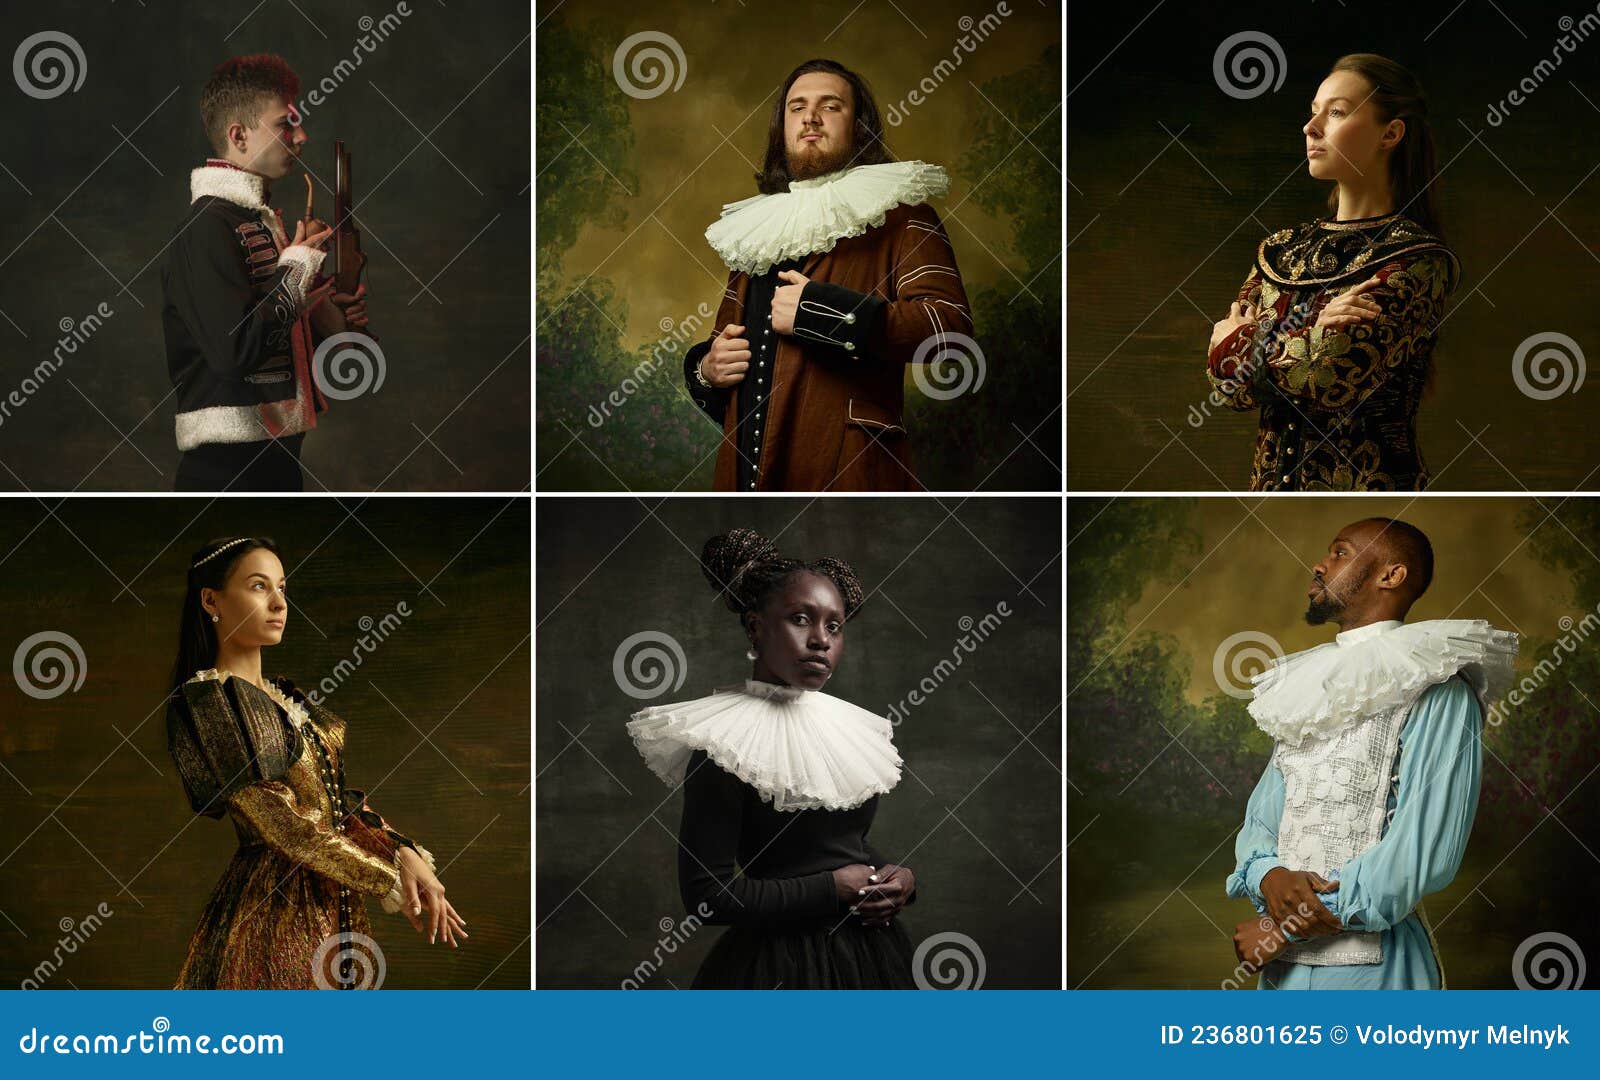 medieval people as a royalty persons in vintage clothing on dark background. concept of comparison of eras, modernity